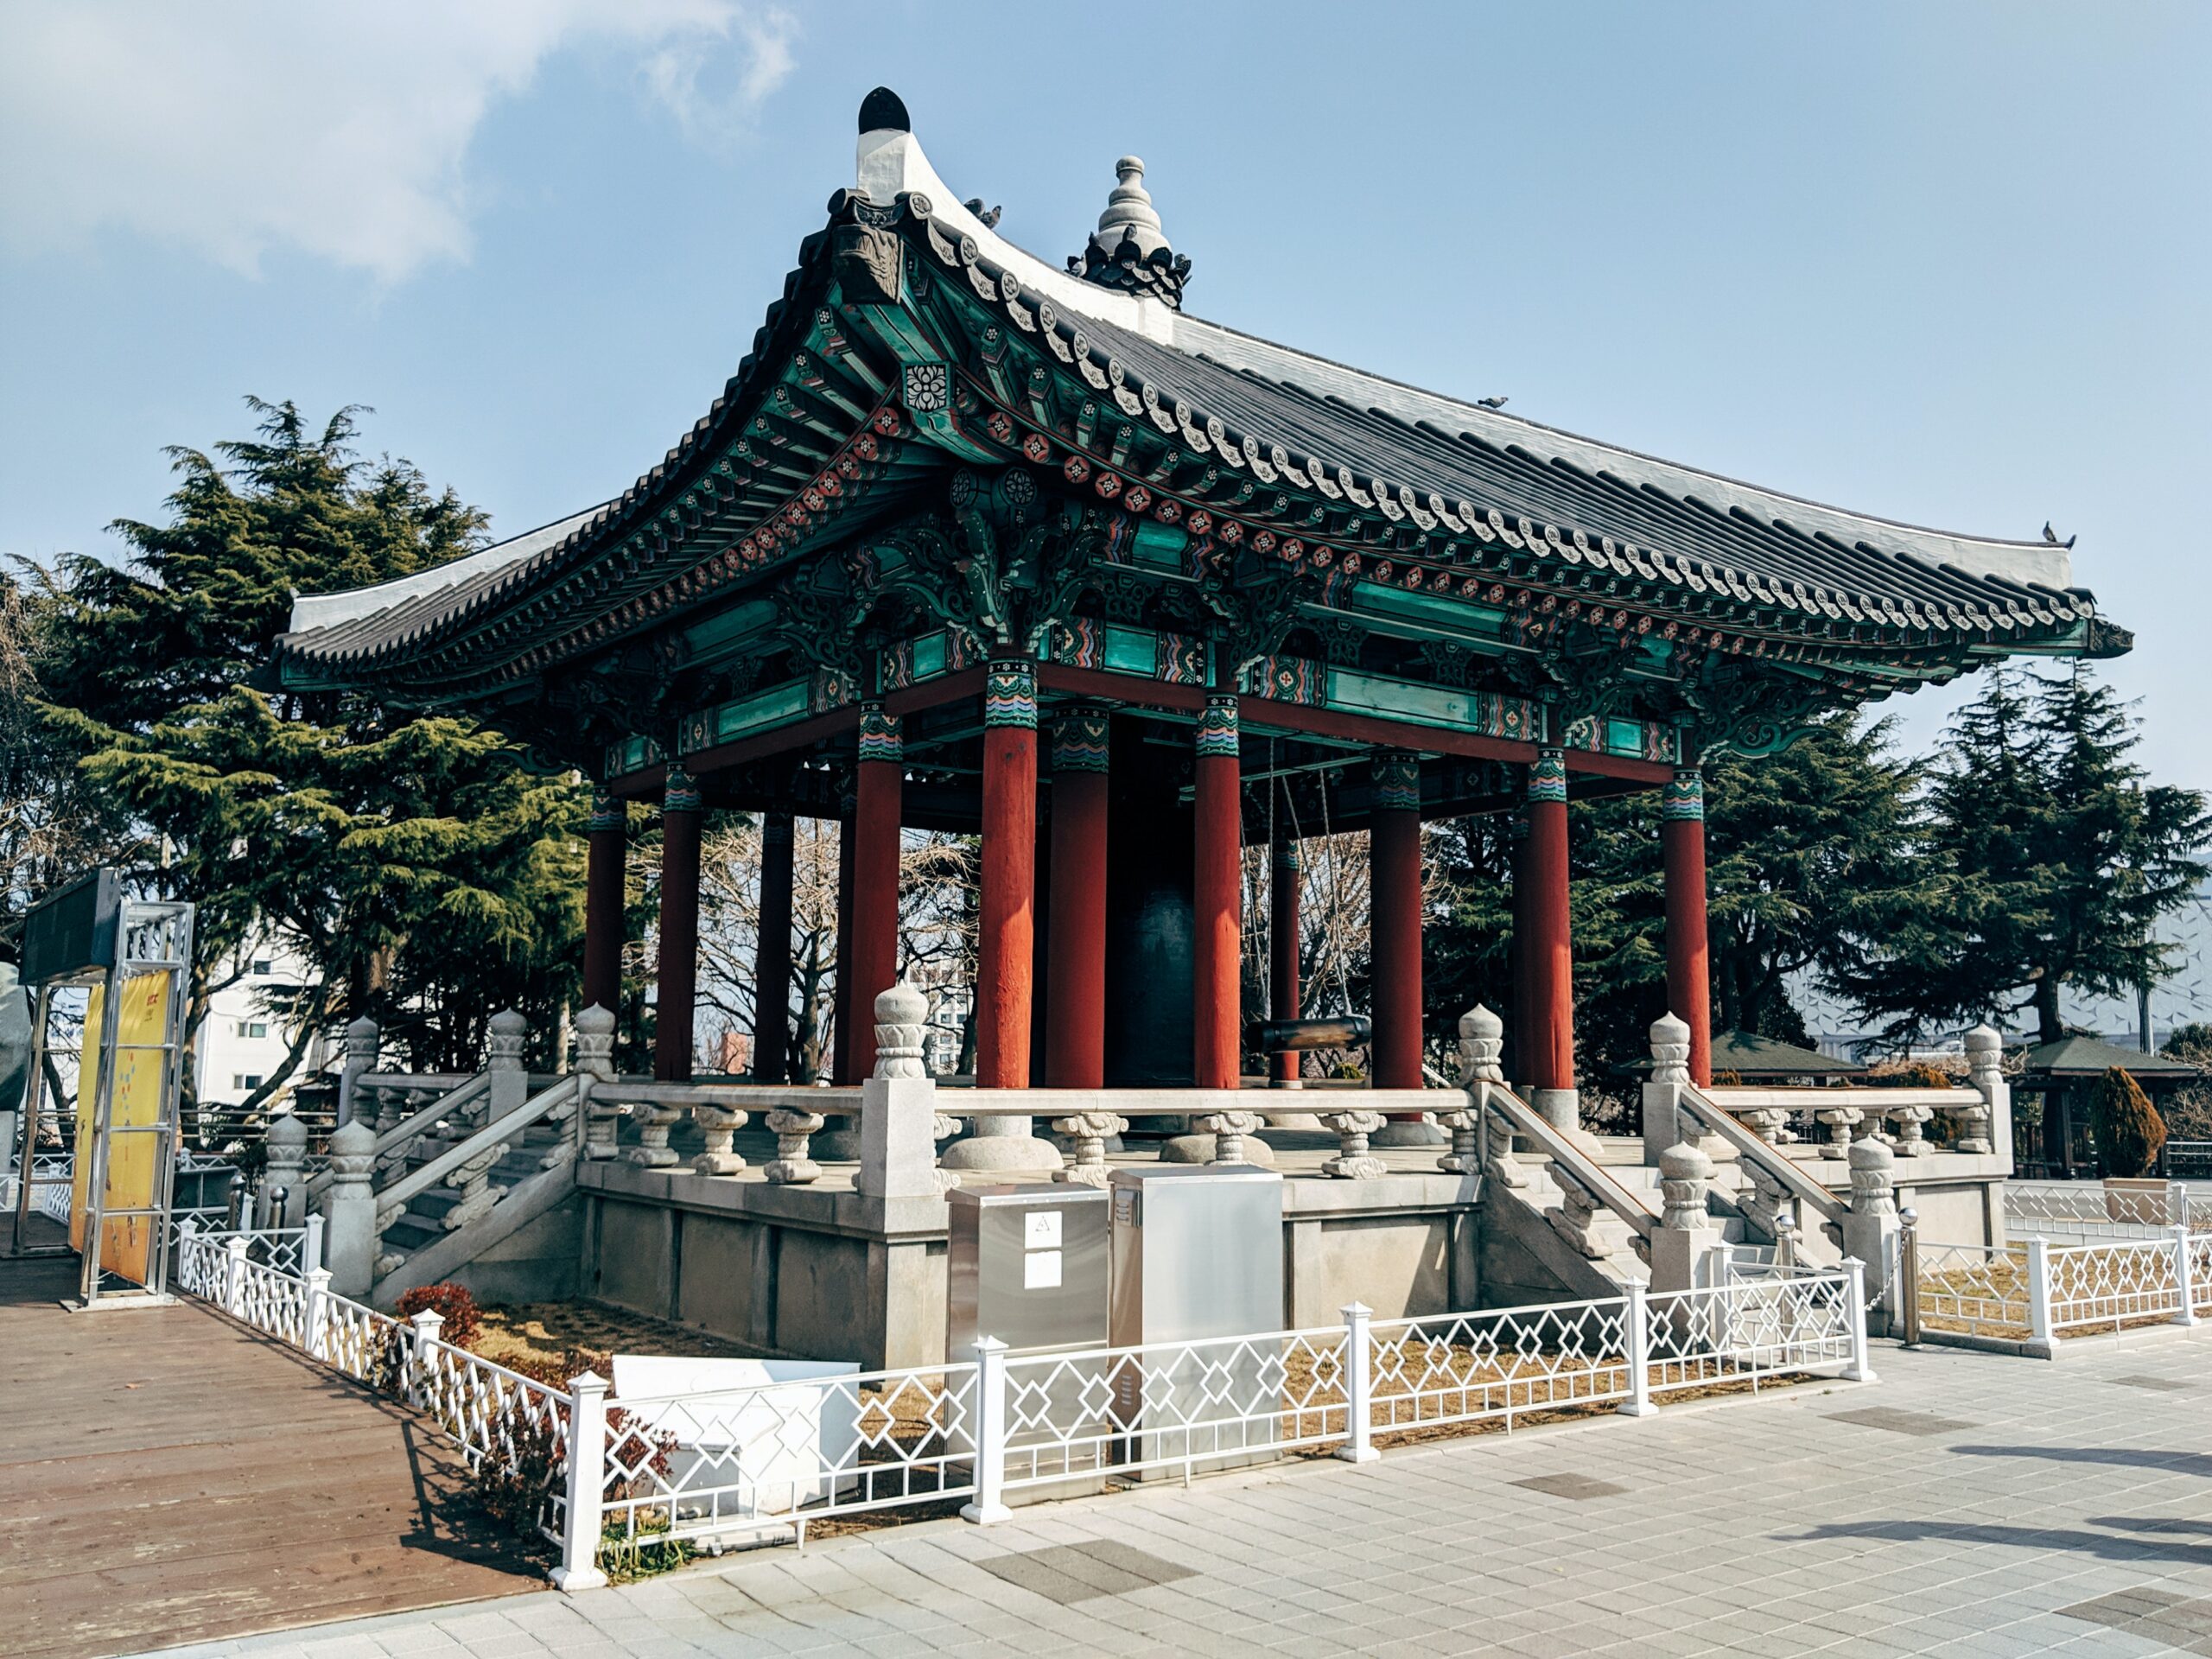 Visit busan pass launches in february for travellers visiting korea to save more! | weirdkaya